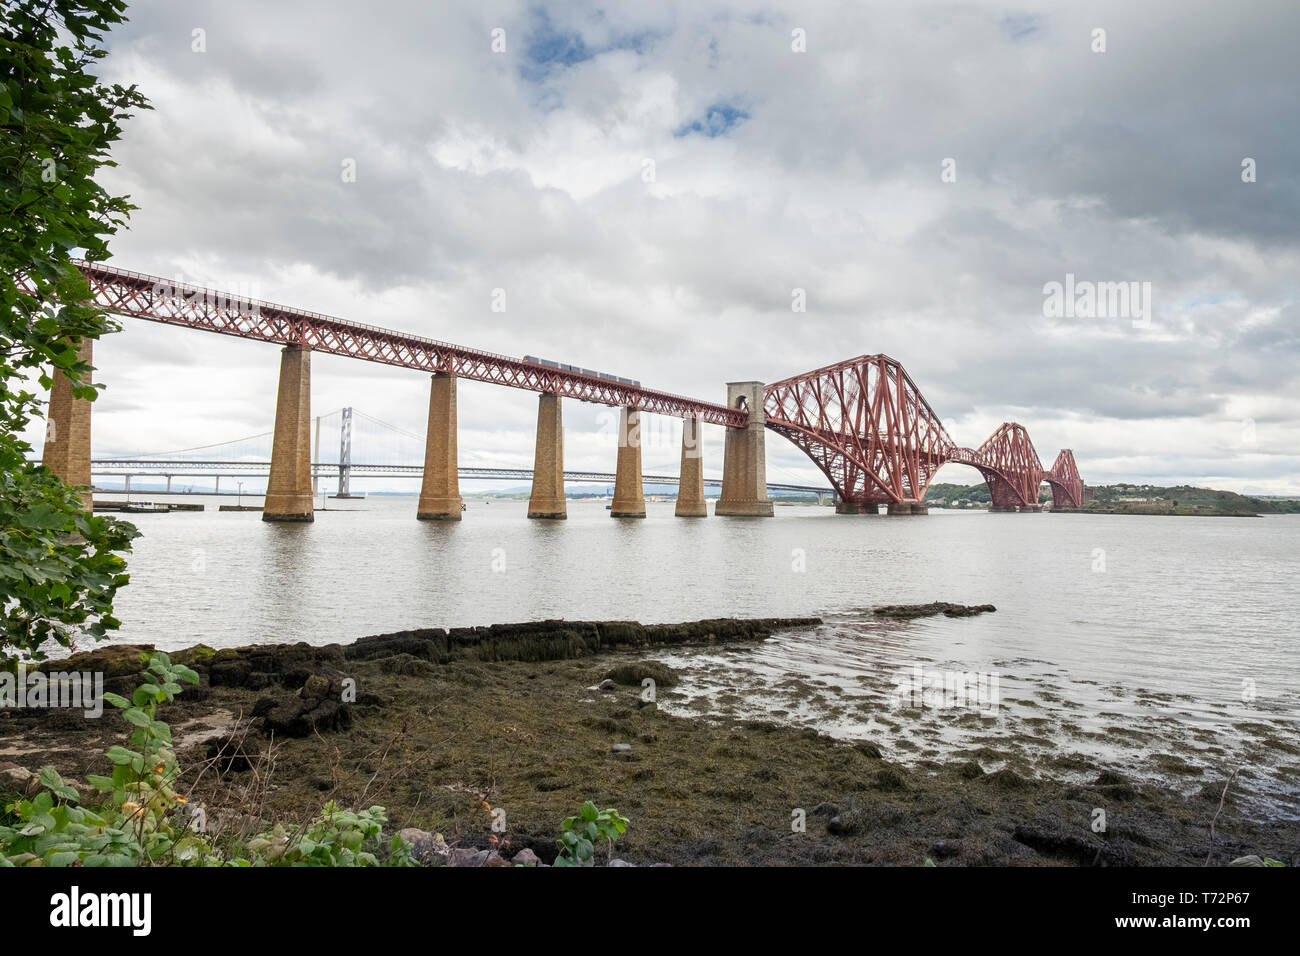 Train on the Forth Rail Bridge over the Firth of Forth, South Queensferry near Edinburgh, Lothian, Scotland. The road bridges are in the background Stock Photo